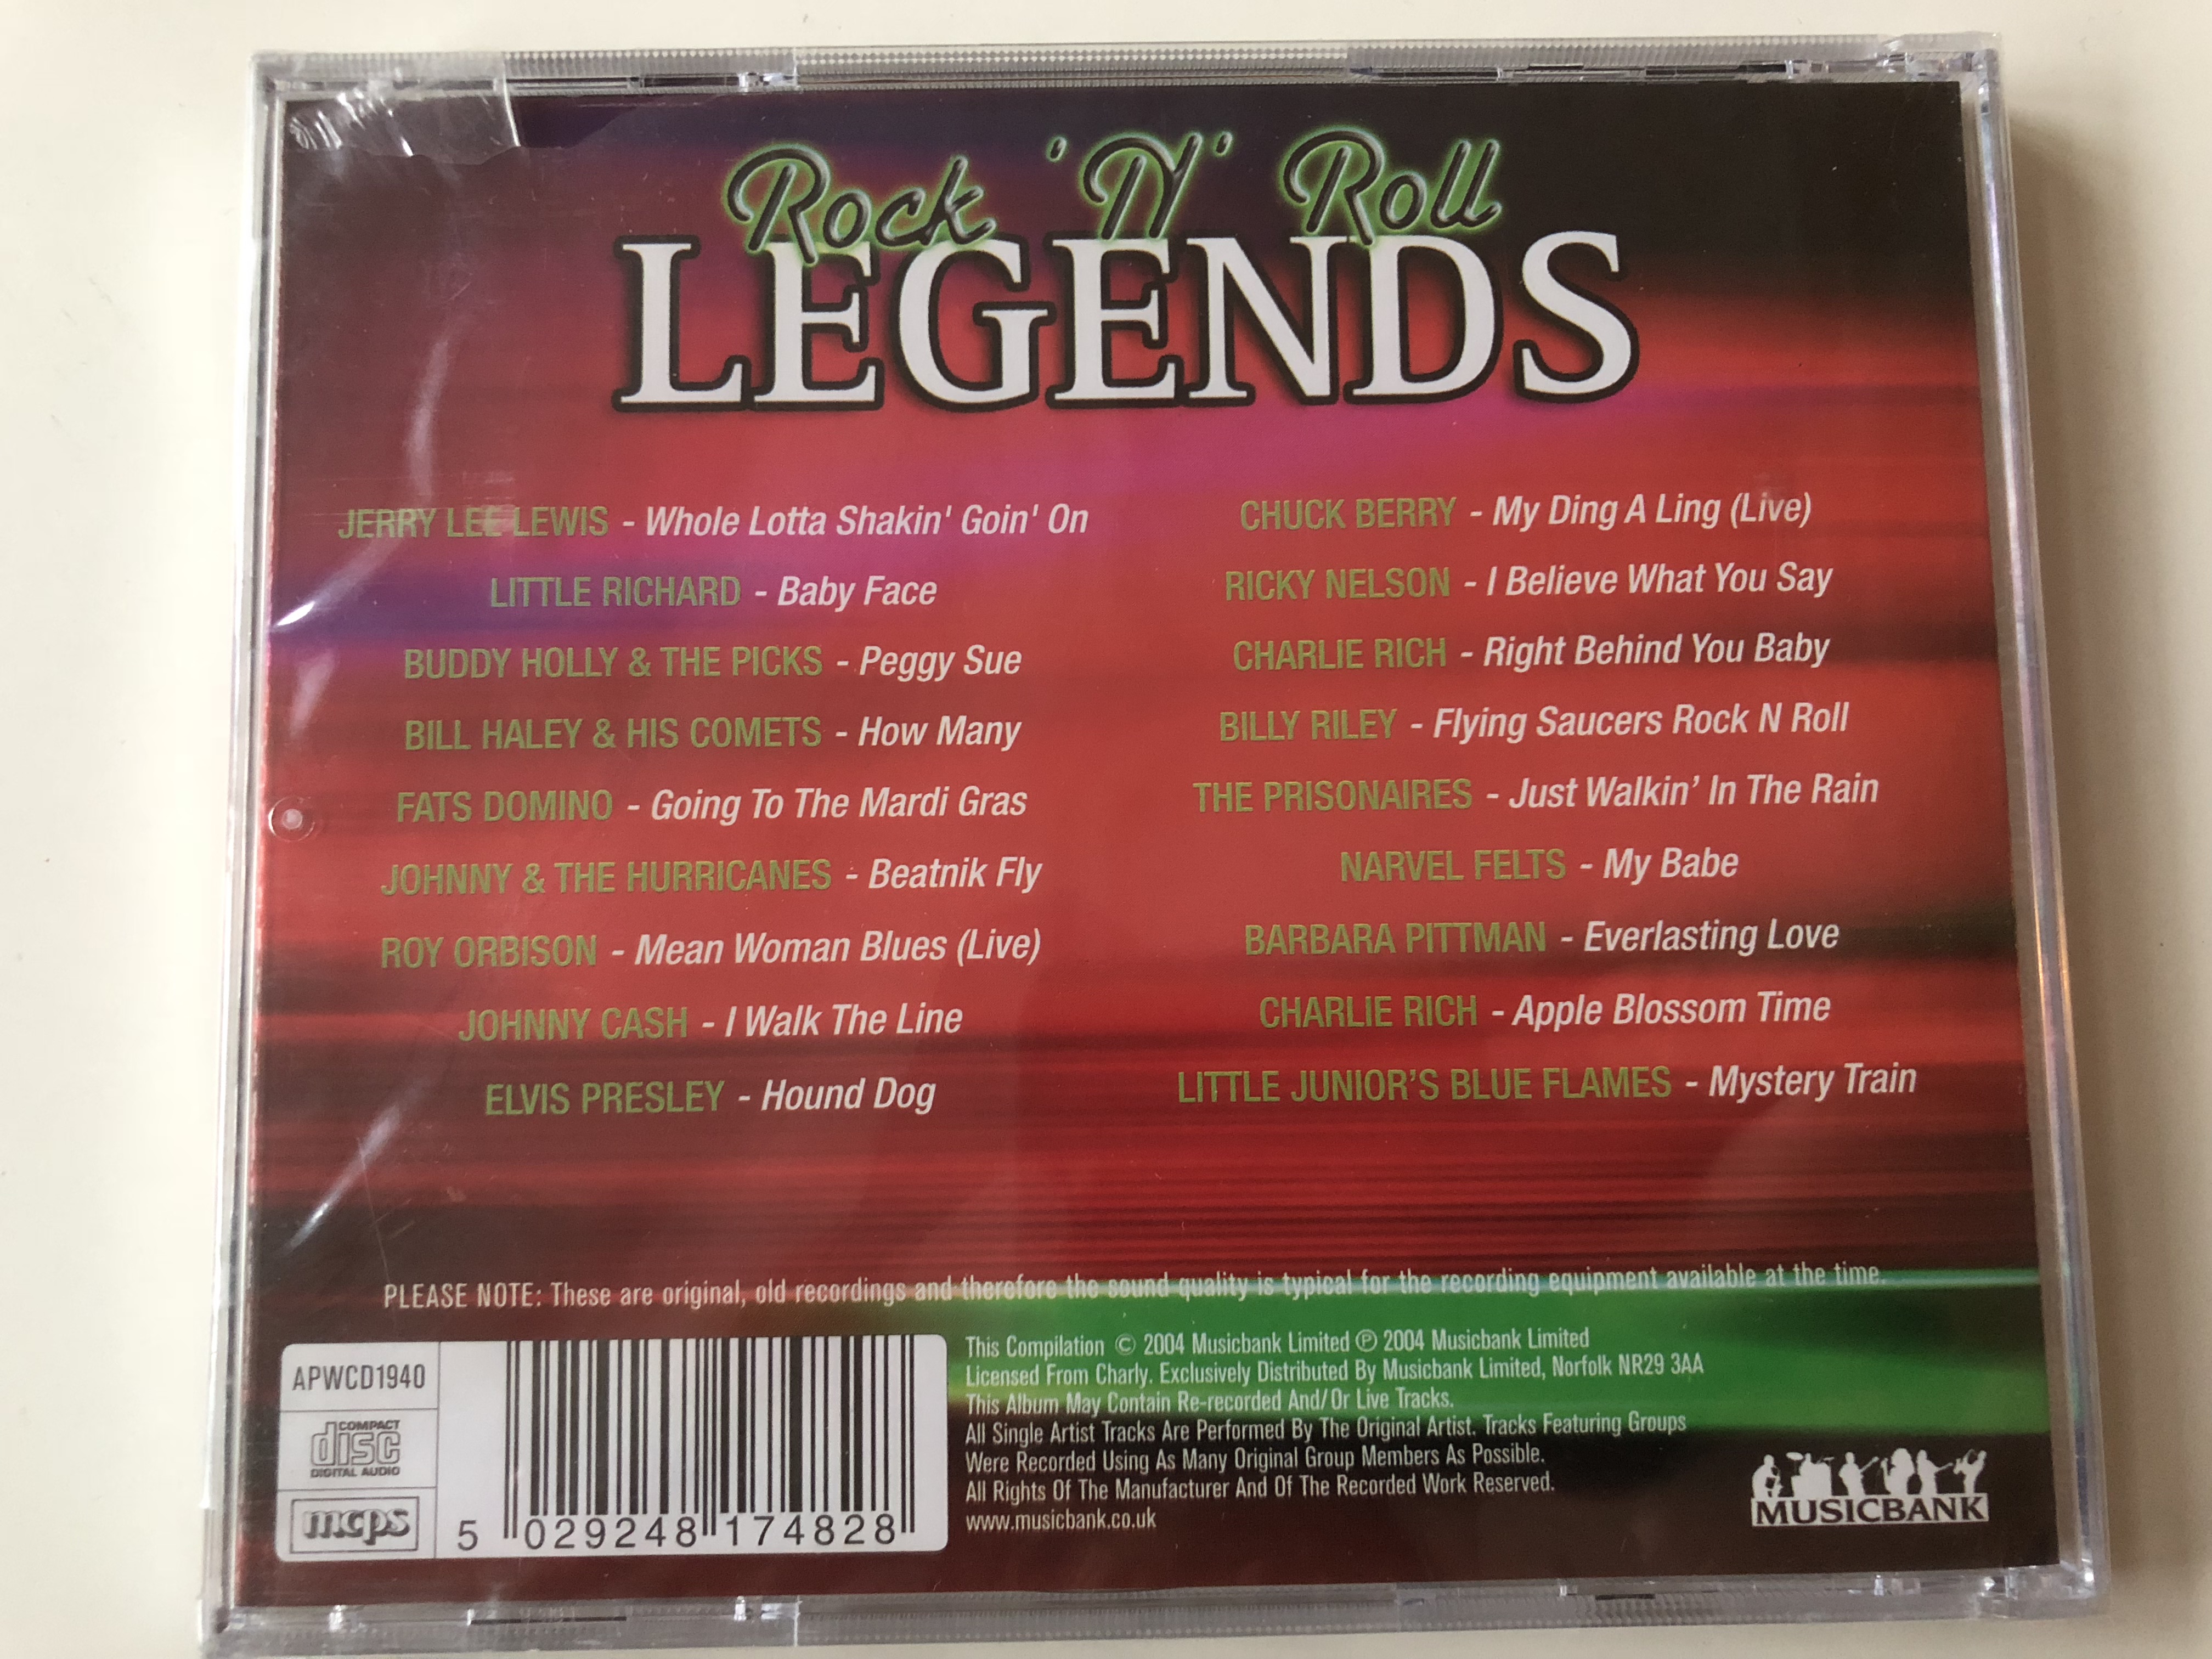 rock-n-roll-legends-whole-lotta-shakin-goin-on-my-ding-a-ling-live-chuck-berry-peggy-sue-buddy-holly-the-picks-hound-dog-elvis-presley-...-and-many-more-audio-cd-2004-musicbank-apwcd-1940-2-.jpg